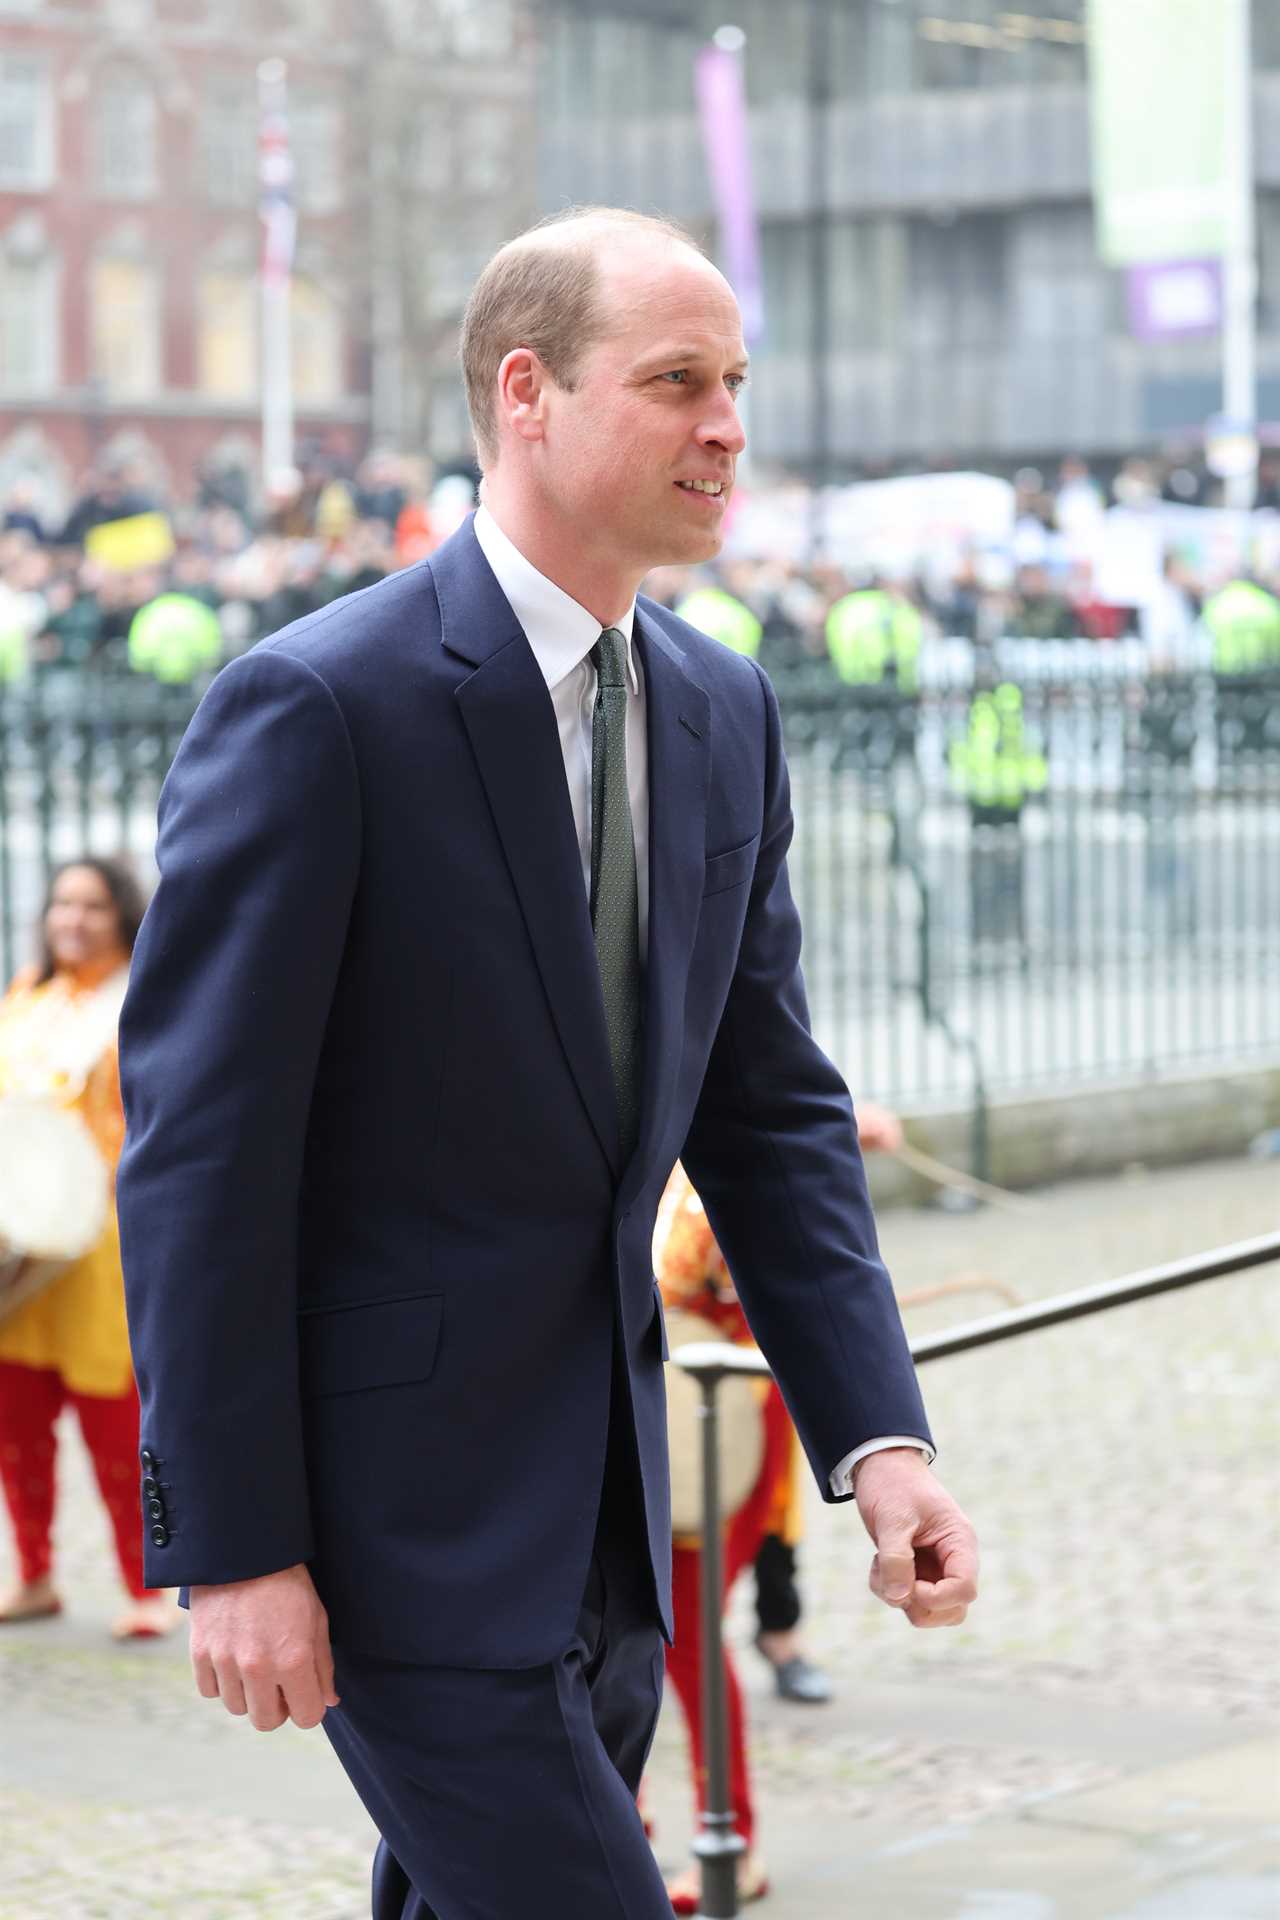 Prince William arrives solo for Commonwealth Day celebration amid Photoshop controversy surrounding Kate